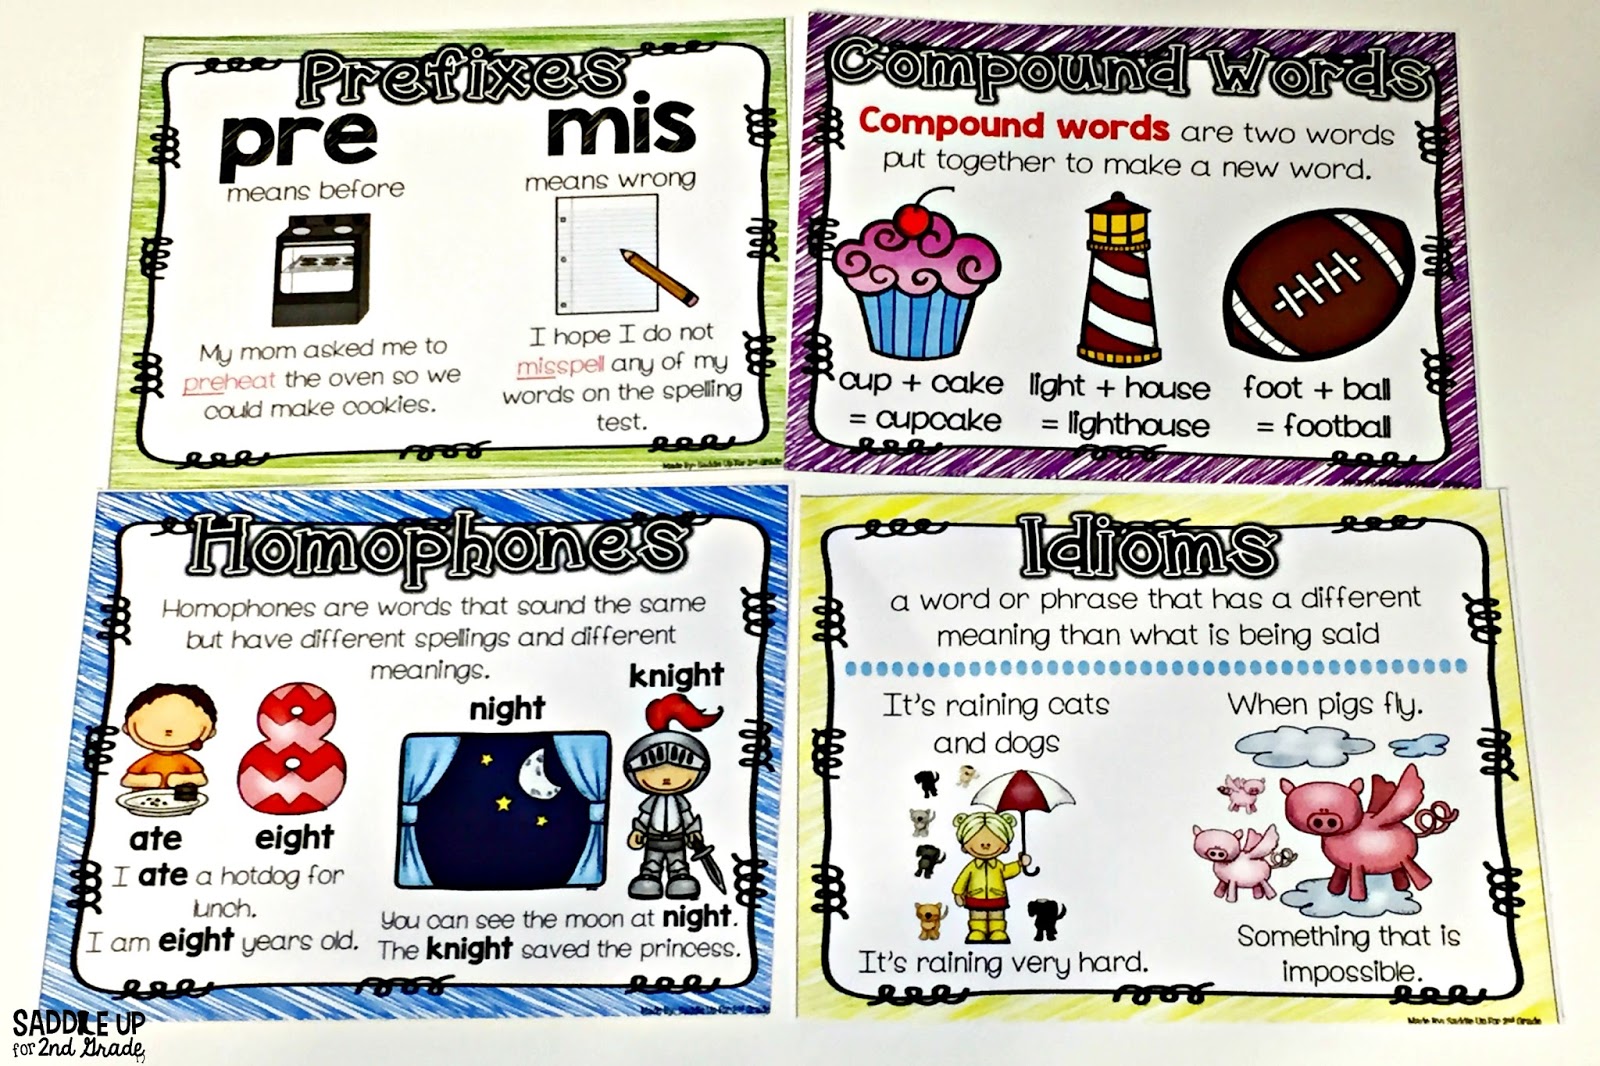 Anchor chart posters are great visuals to use in your classroom to show what skills you are currently focusing on. This is a set of 45 colored and black and white posters that cover comprehension, vocabulary and fluency skills. You may print them to display in your classroom or use on a focus wall. You can also print them smaller to use in journals. 